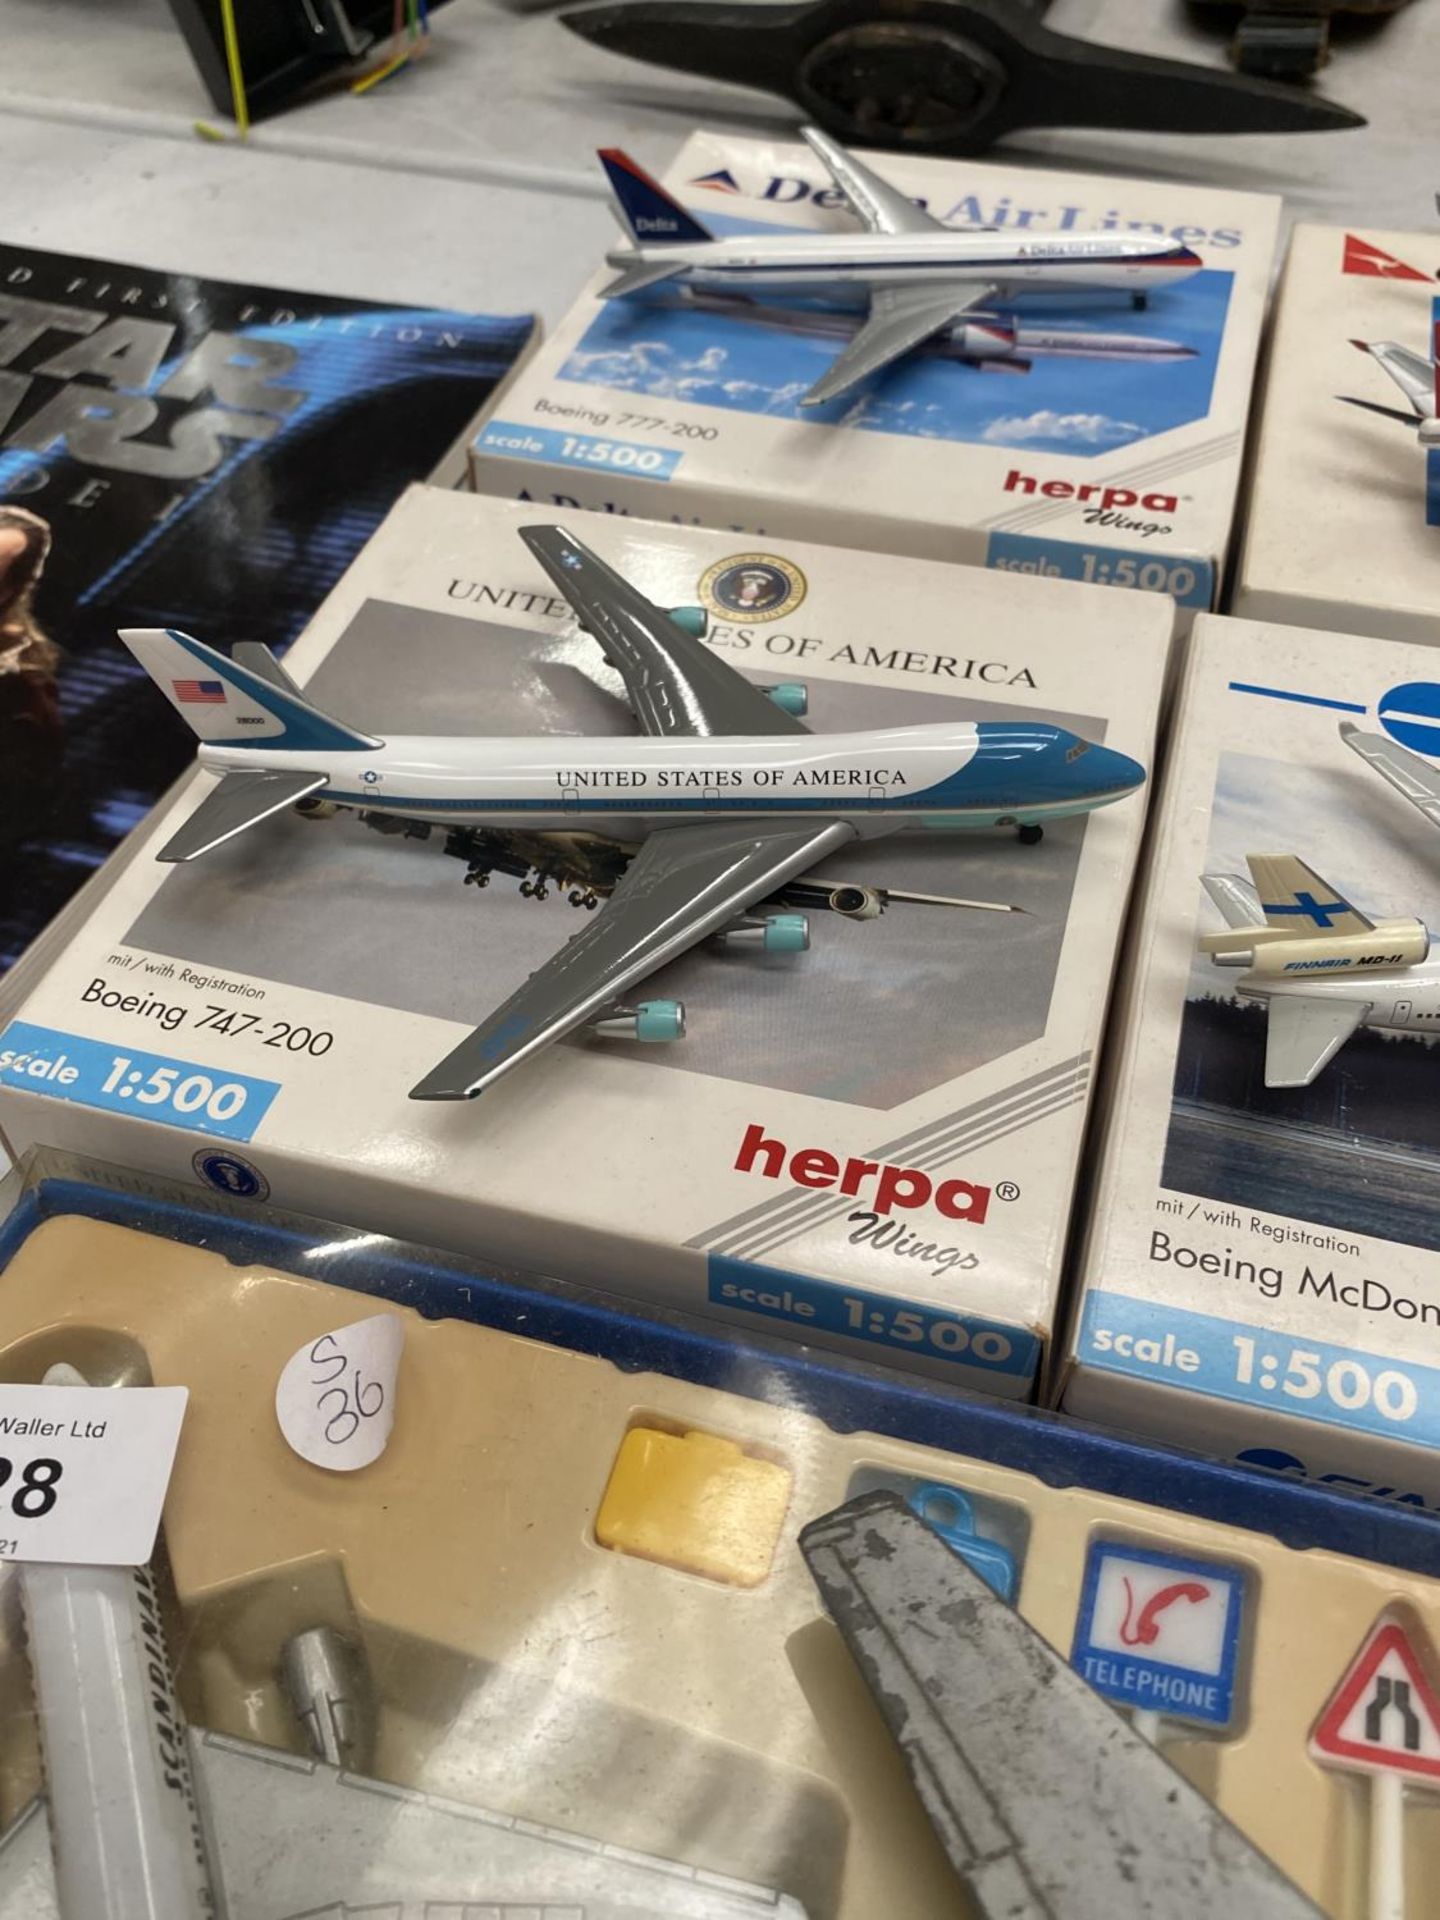 A COLLECTION OF MODEL AIRCRAFT MODELS - Image 3 of 4